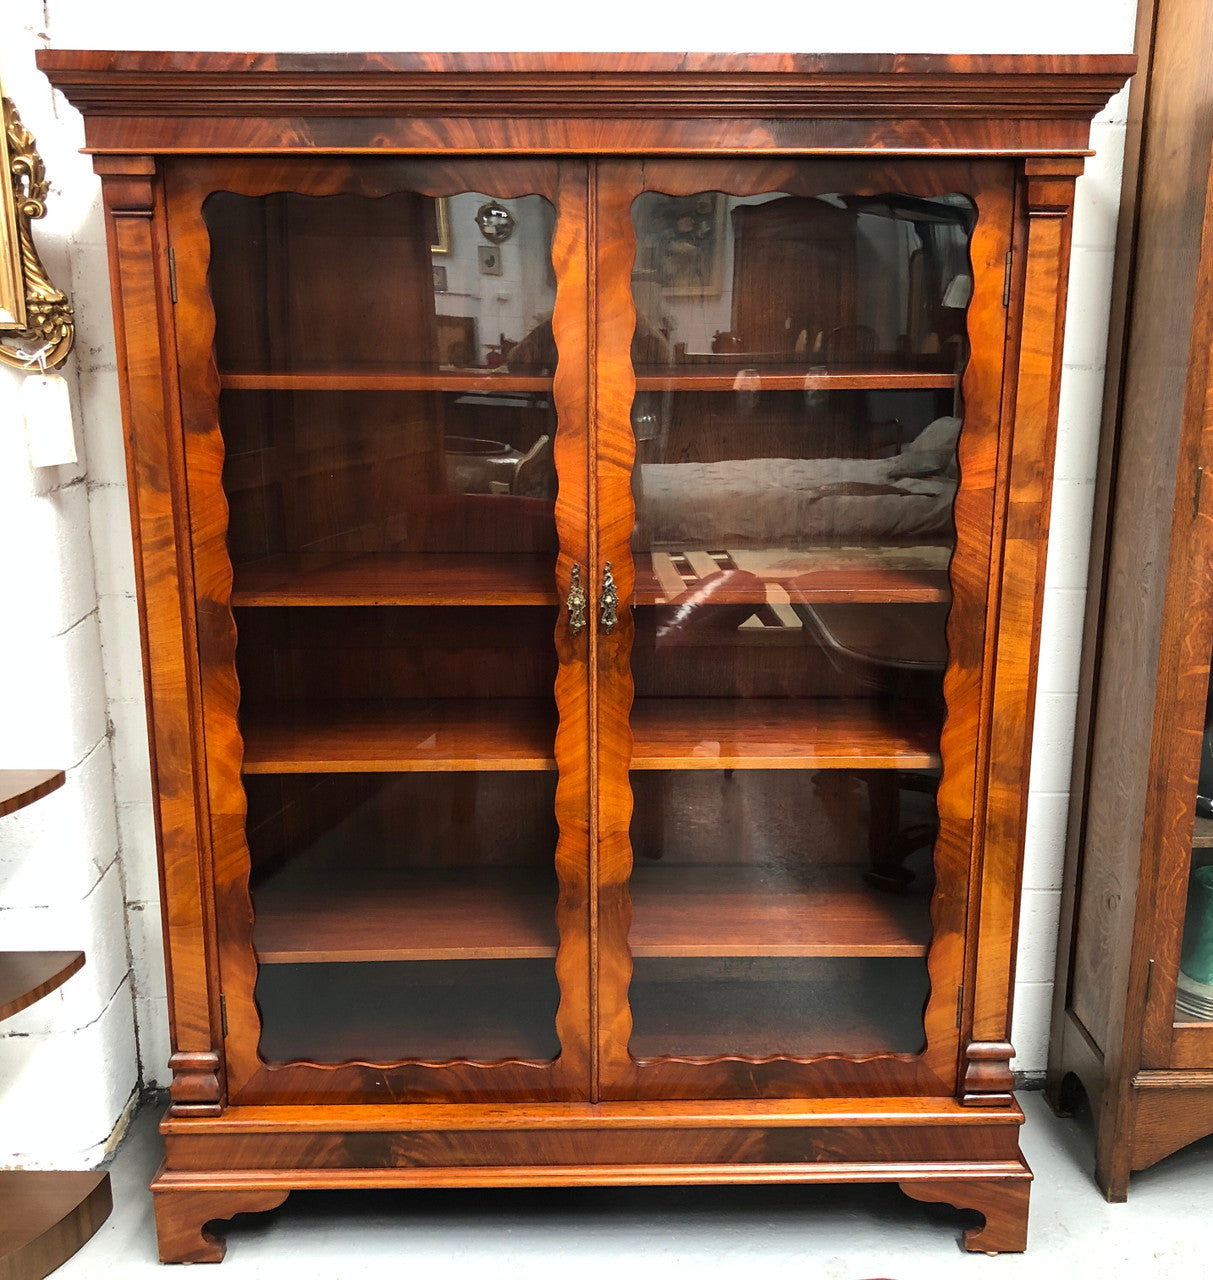 Beautiful Victorian flame Mahogany bookcase/display cabinet. It has four adjustable shelves and is in good original detailed condition.